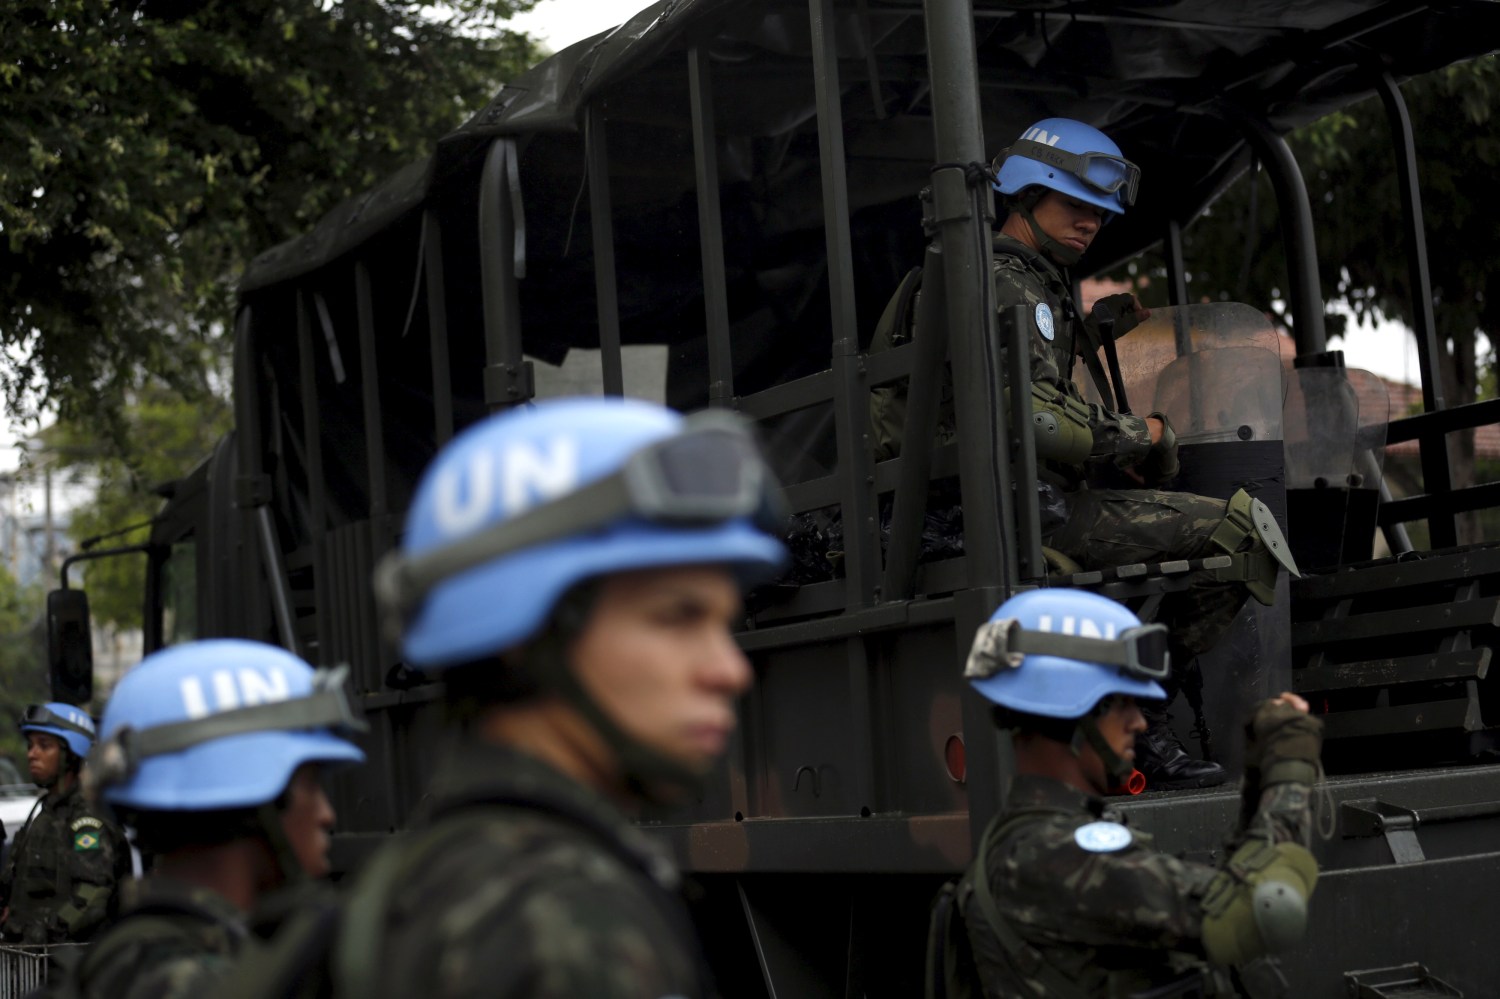 Brazilian soldiers of the United Nations Peacekeeping Forces attend a training exercise in Rio de Janeiro April 22, 2015, before departing to Haiti. REUTERS/Pilar Olivares - RTX19U2E